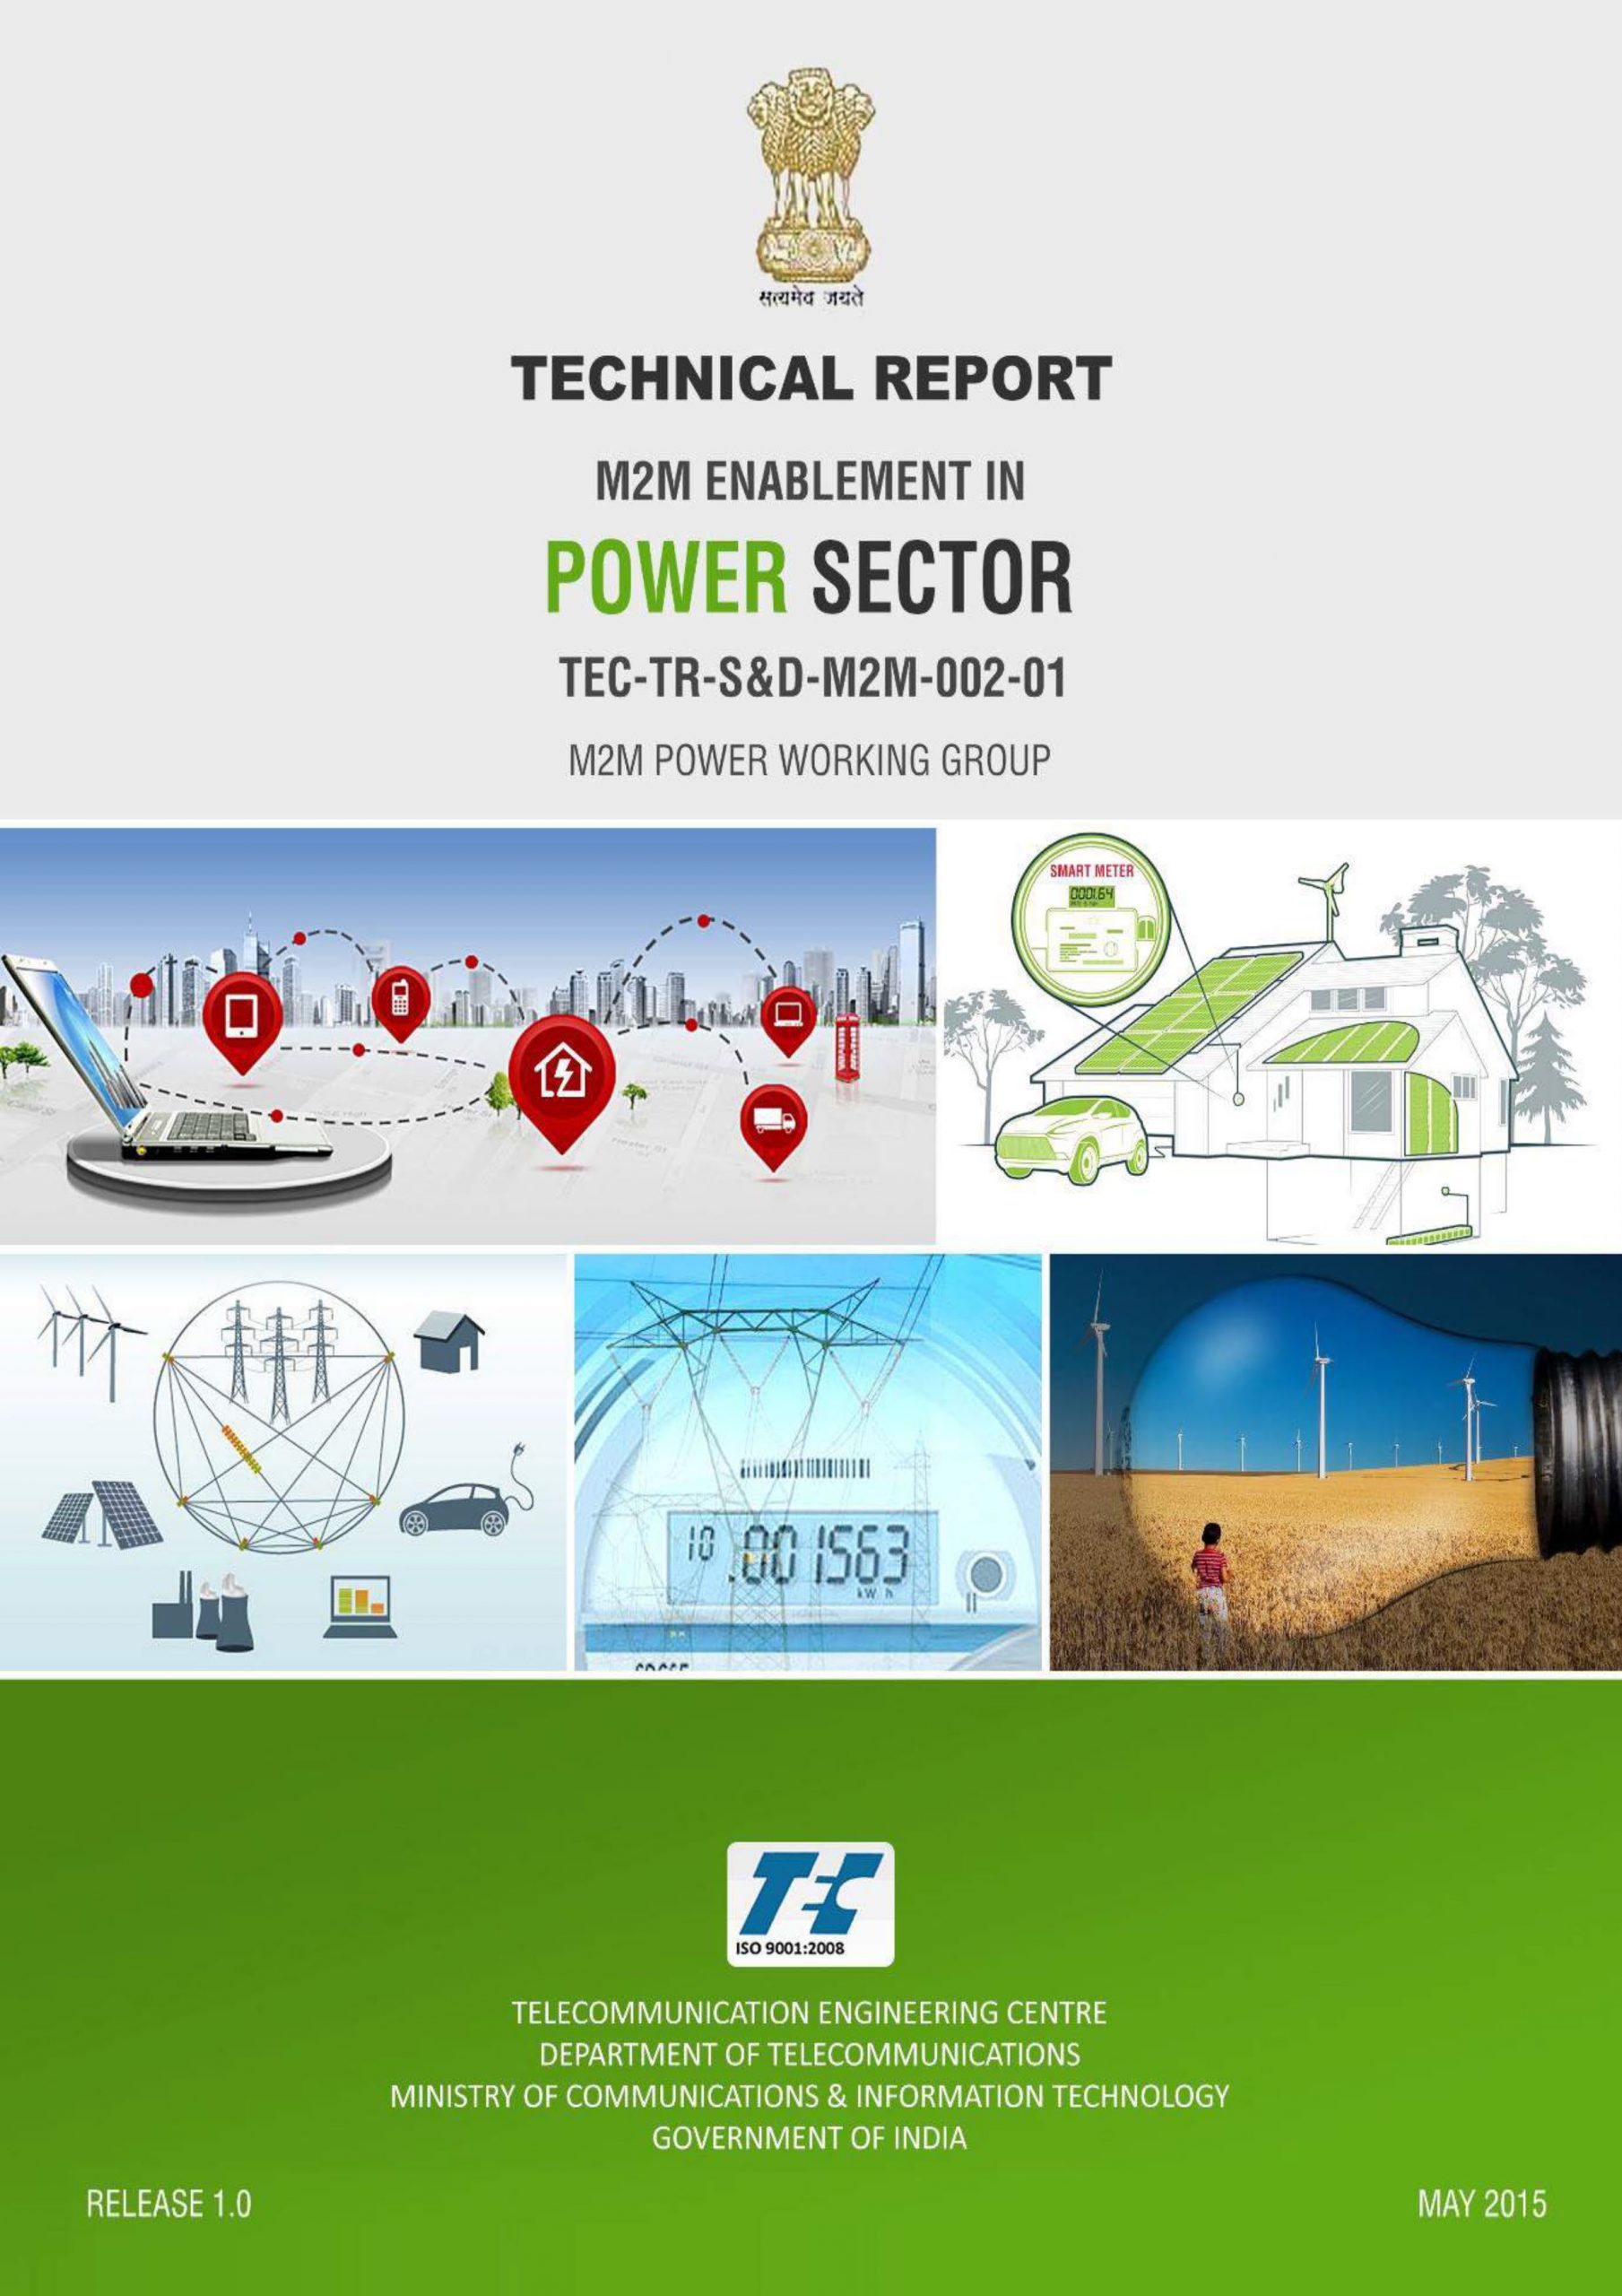 Technical report on Power sector